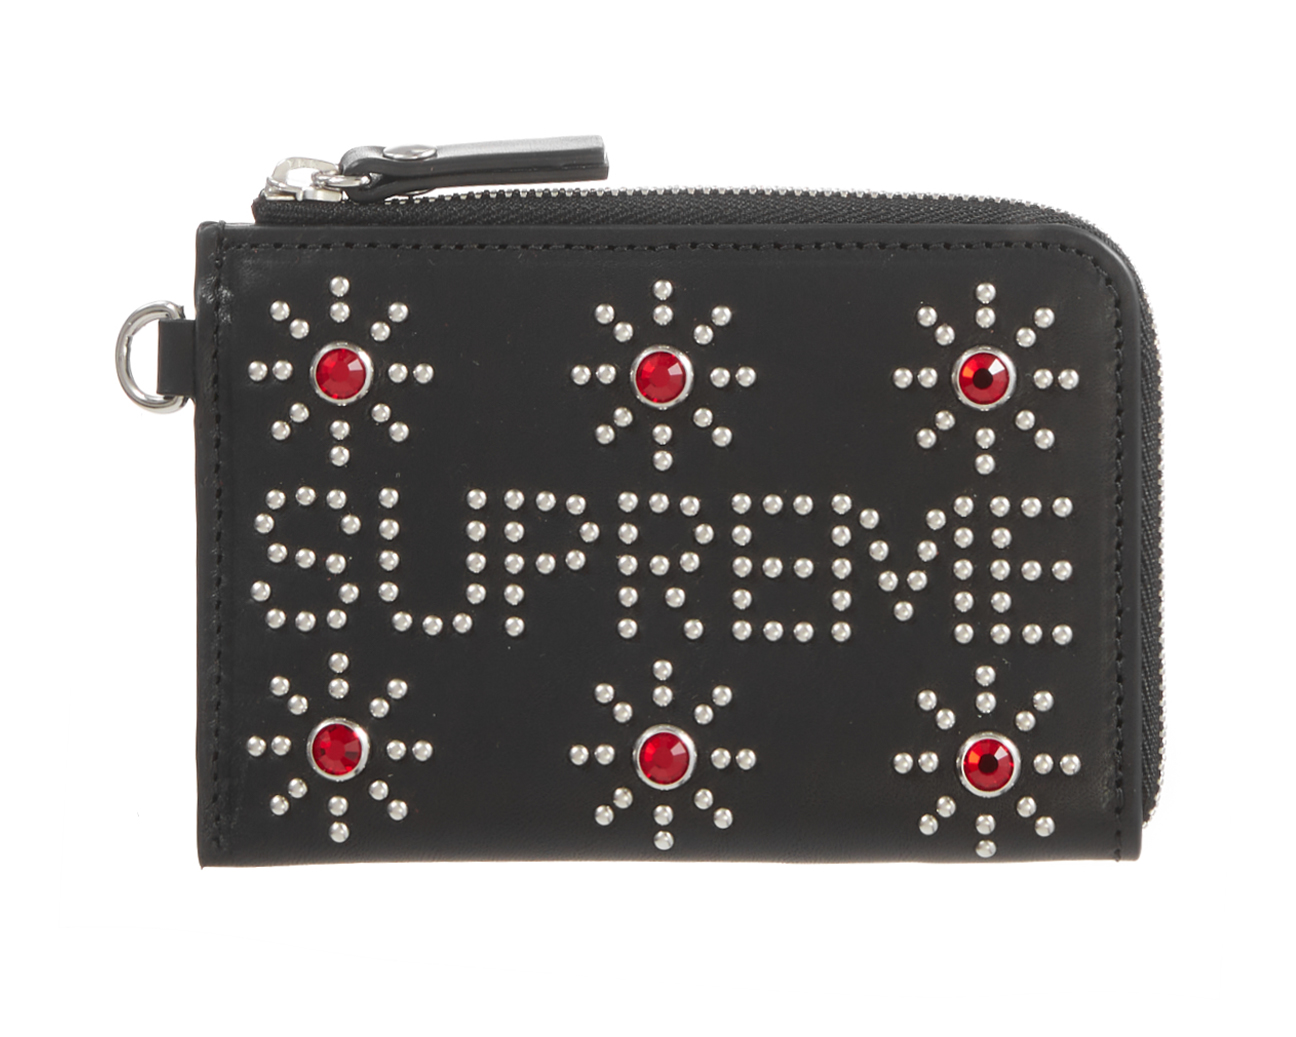 Hollywood Trading Company Studded Walletカラーブラック